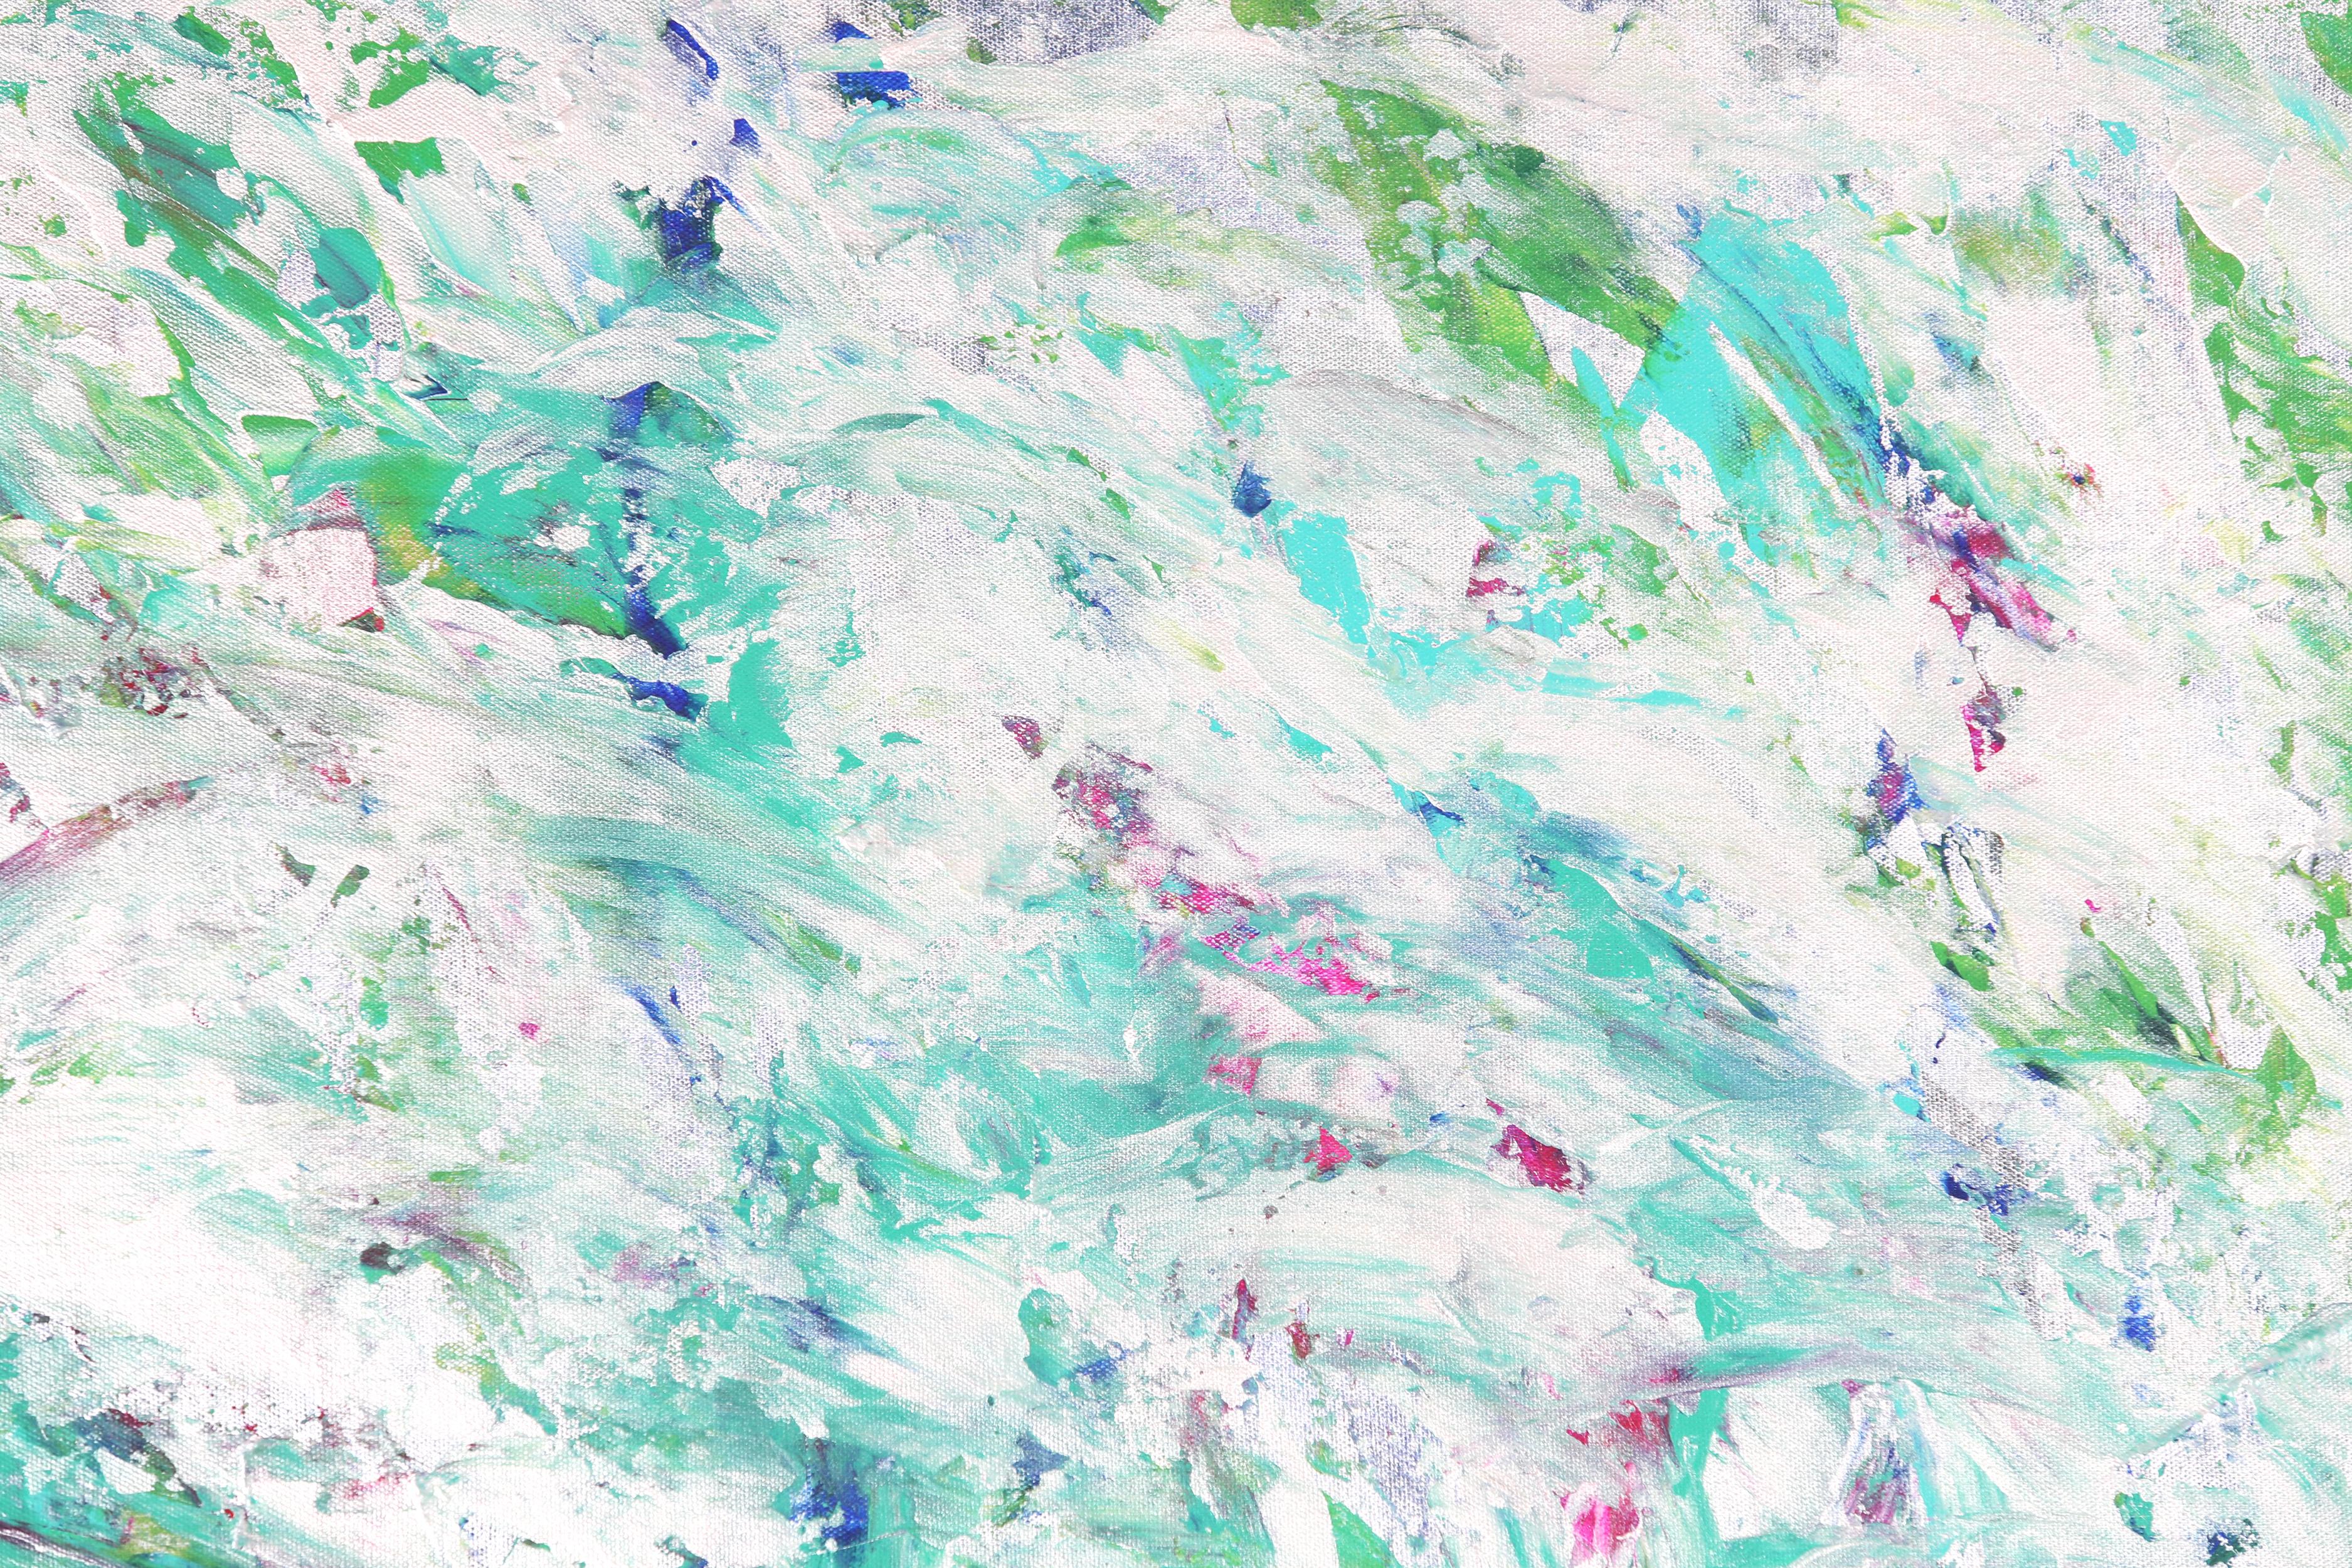 Pearl Paradise - Blue Abstract Painting by Estelle Asmodelle